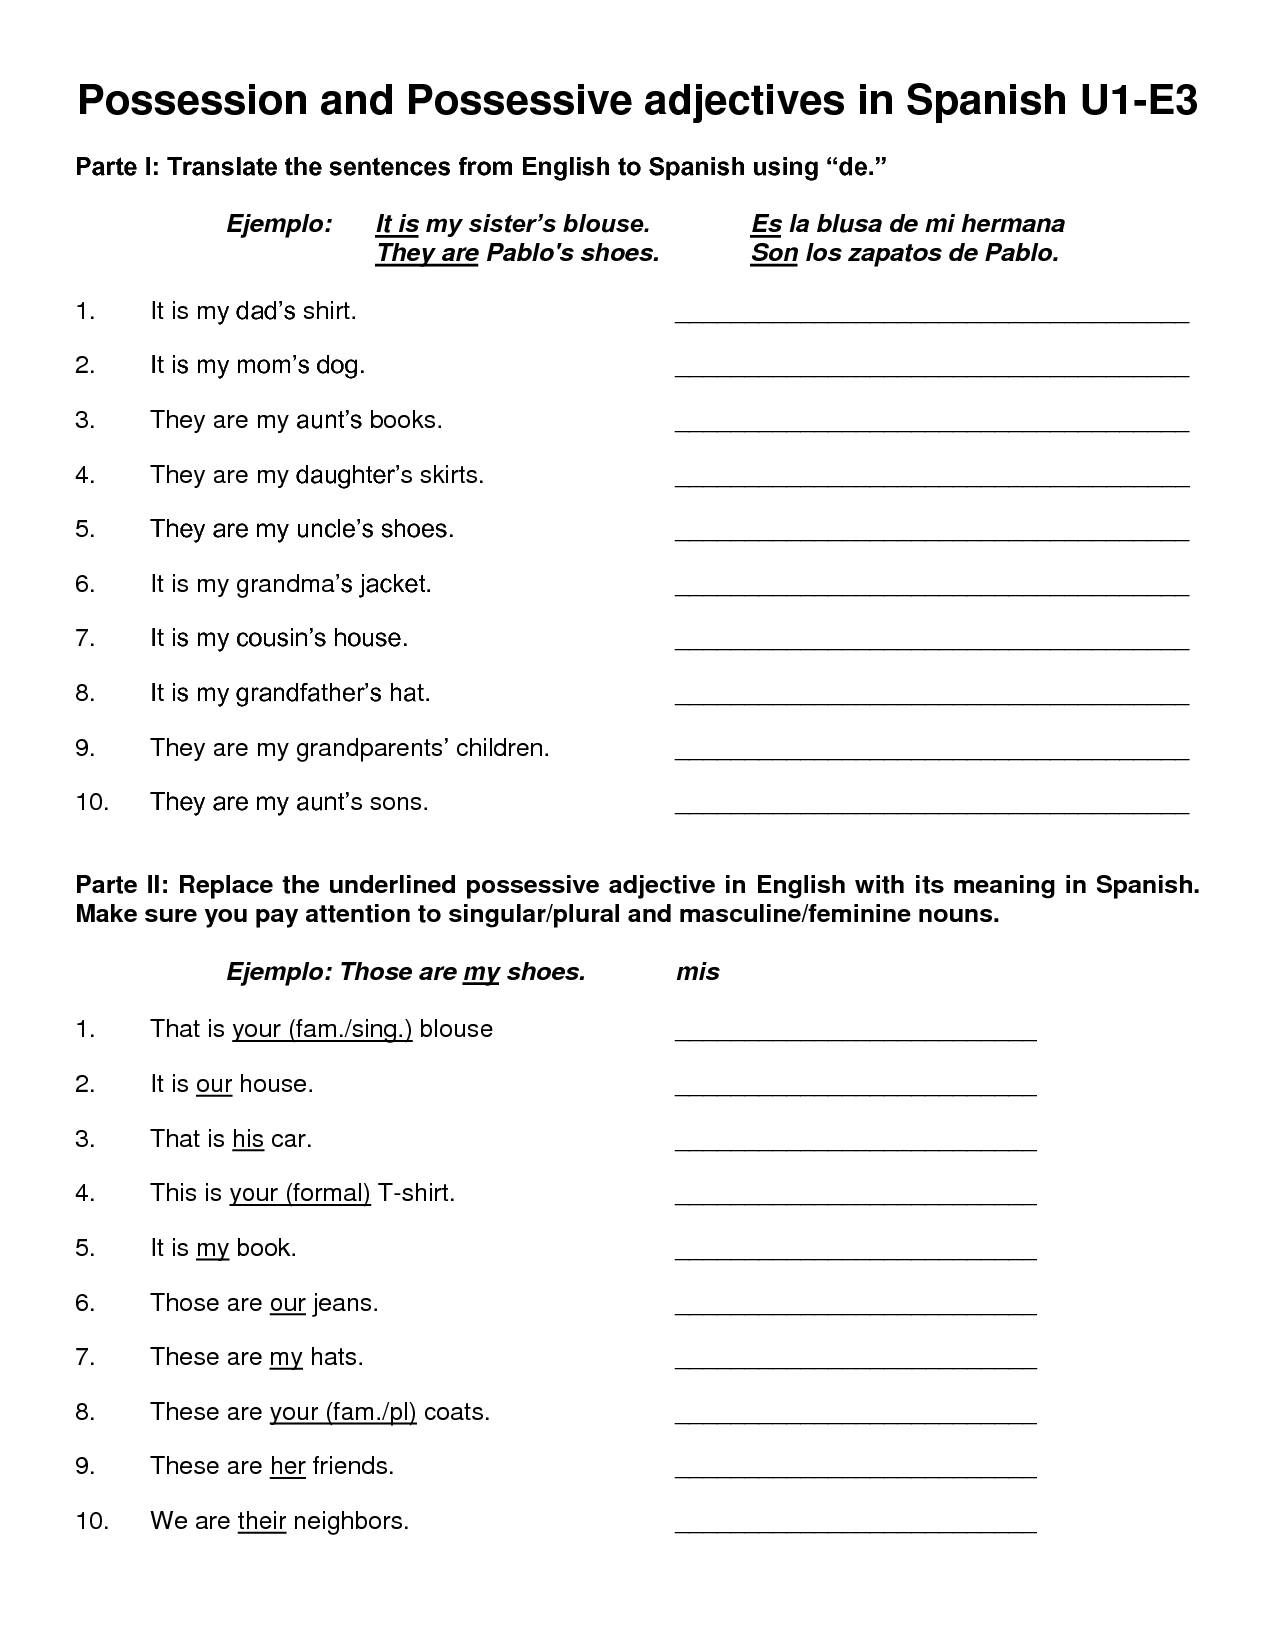 worksheet-2-possessive-adjectives-spanish-answers-db-excel